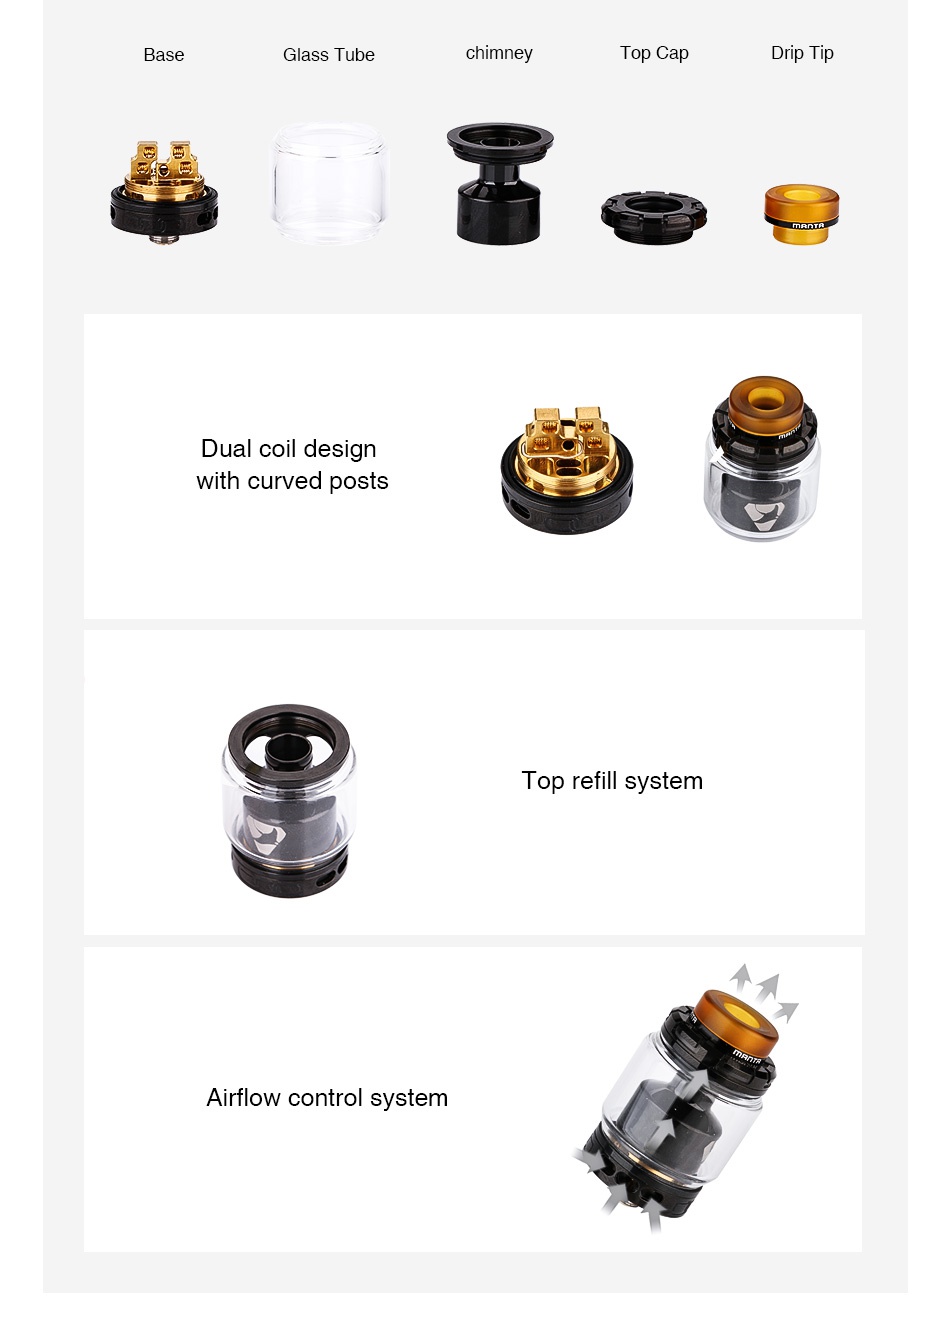 Advken MANTA RTA 5ml Base Glass Tube Top Cap Dual coil design with curved posts Top refill system   Airflow control system